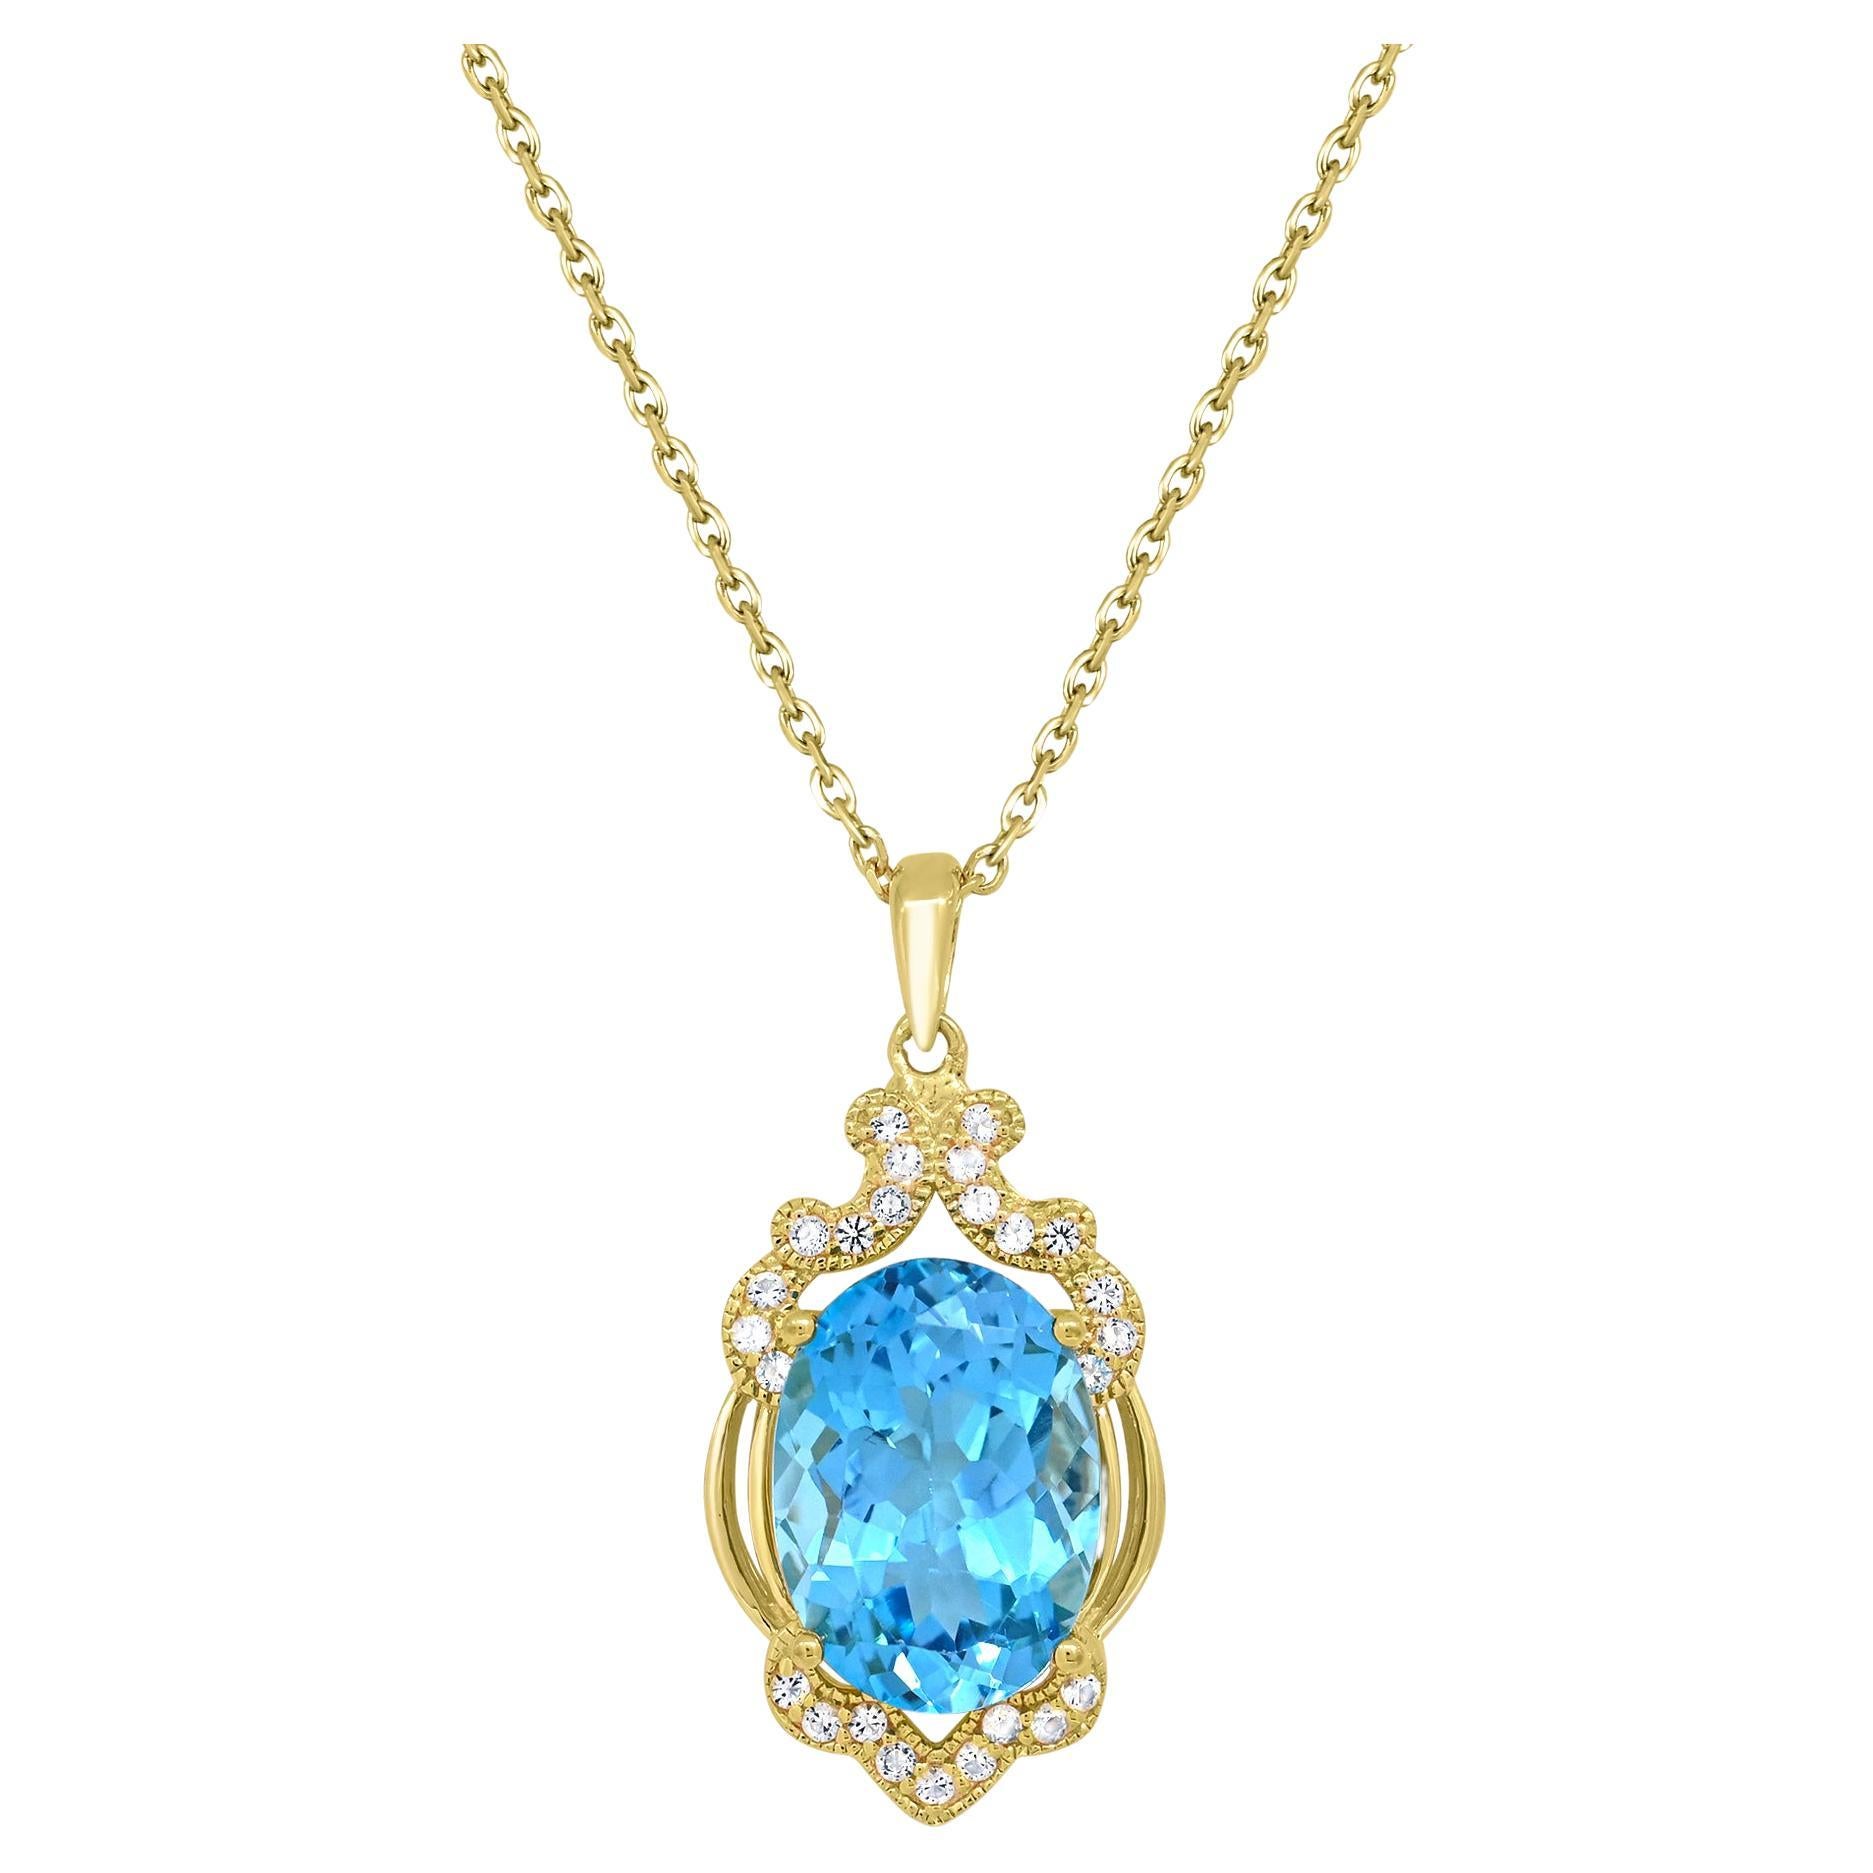 8-1/8 Carat White & Blue Topaz Necklace in 14K Yellow Gold over Sterling Silver